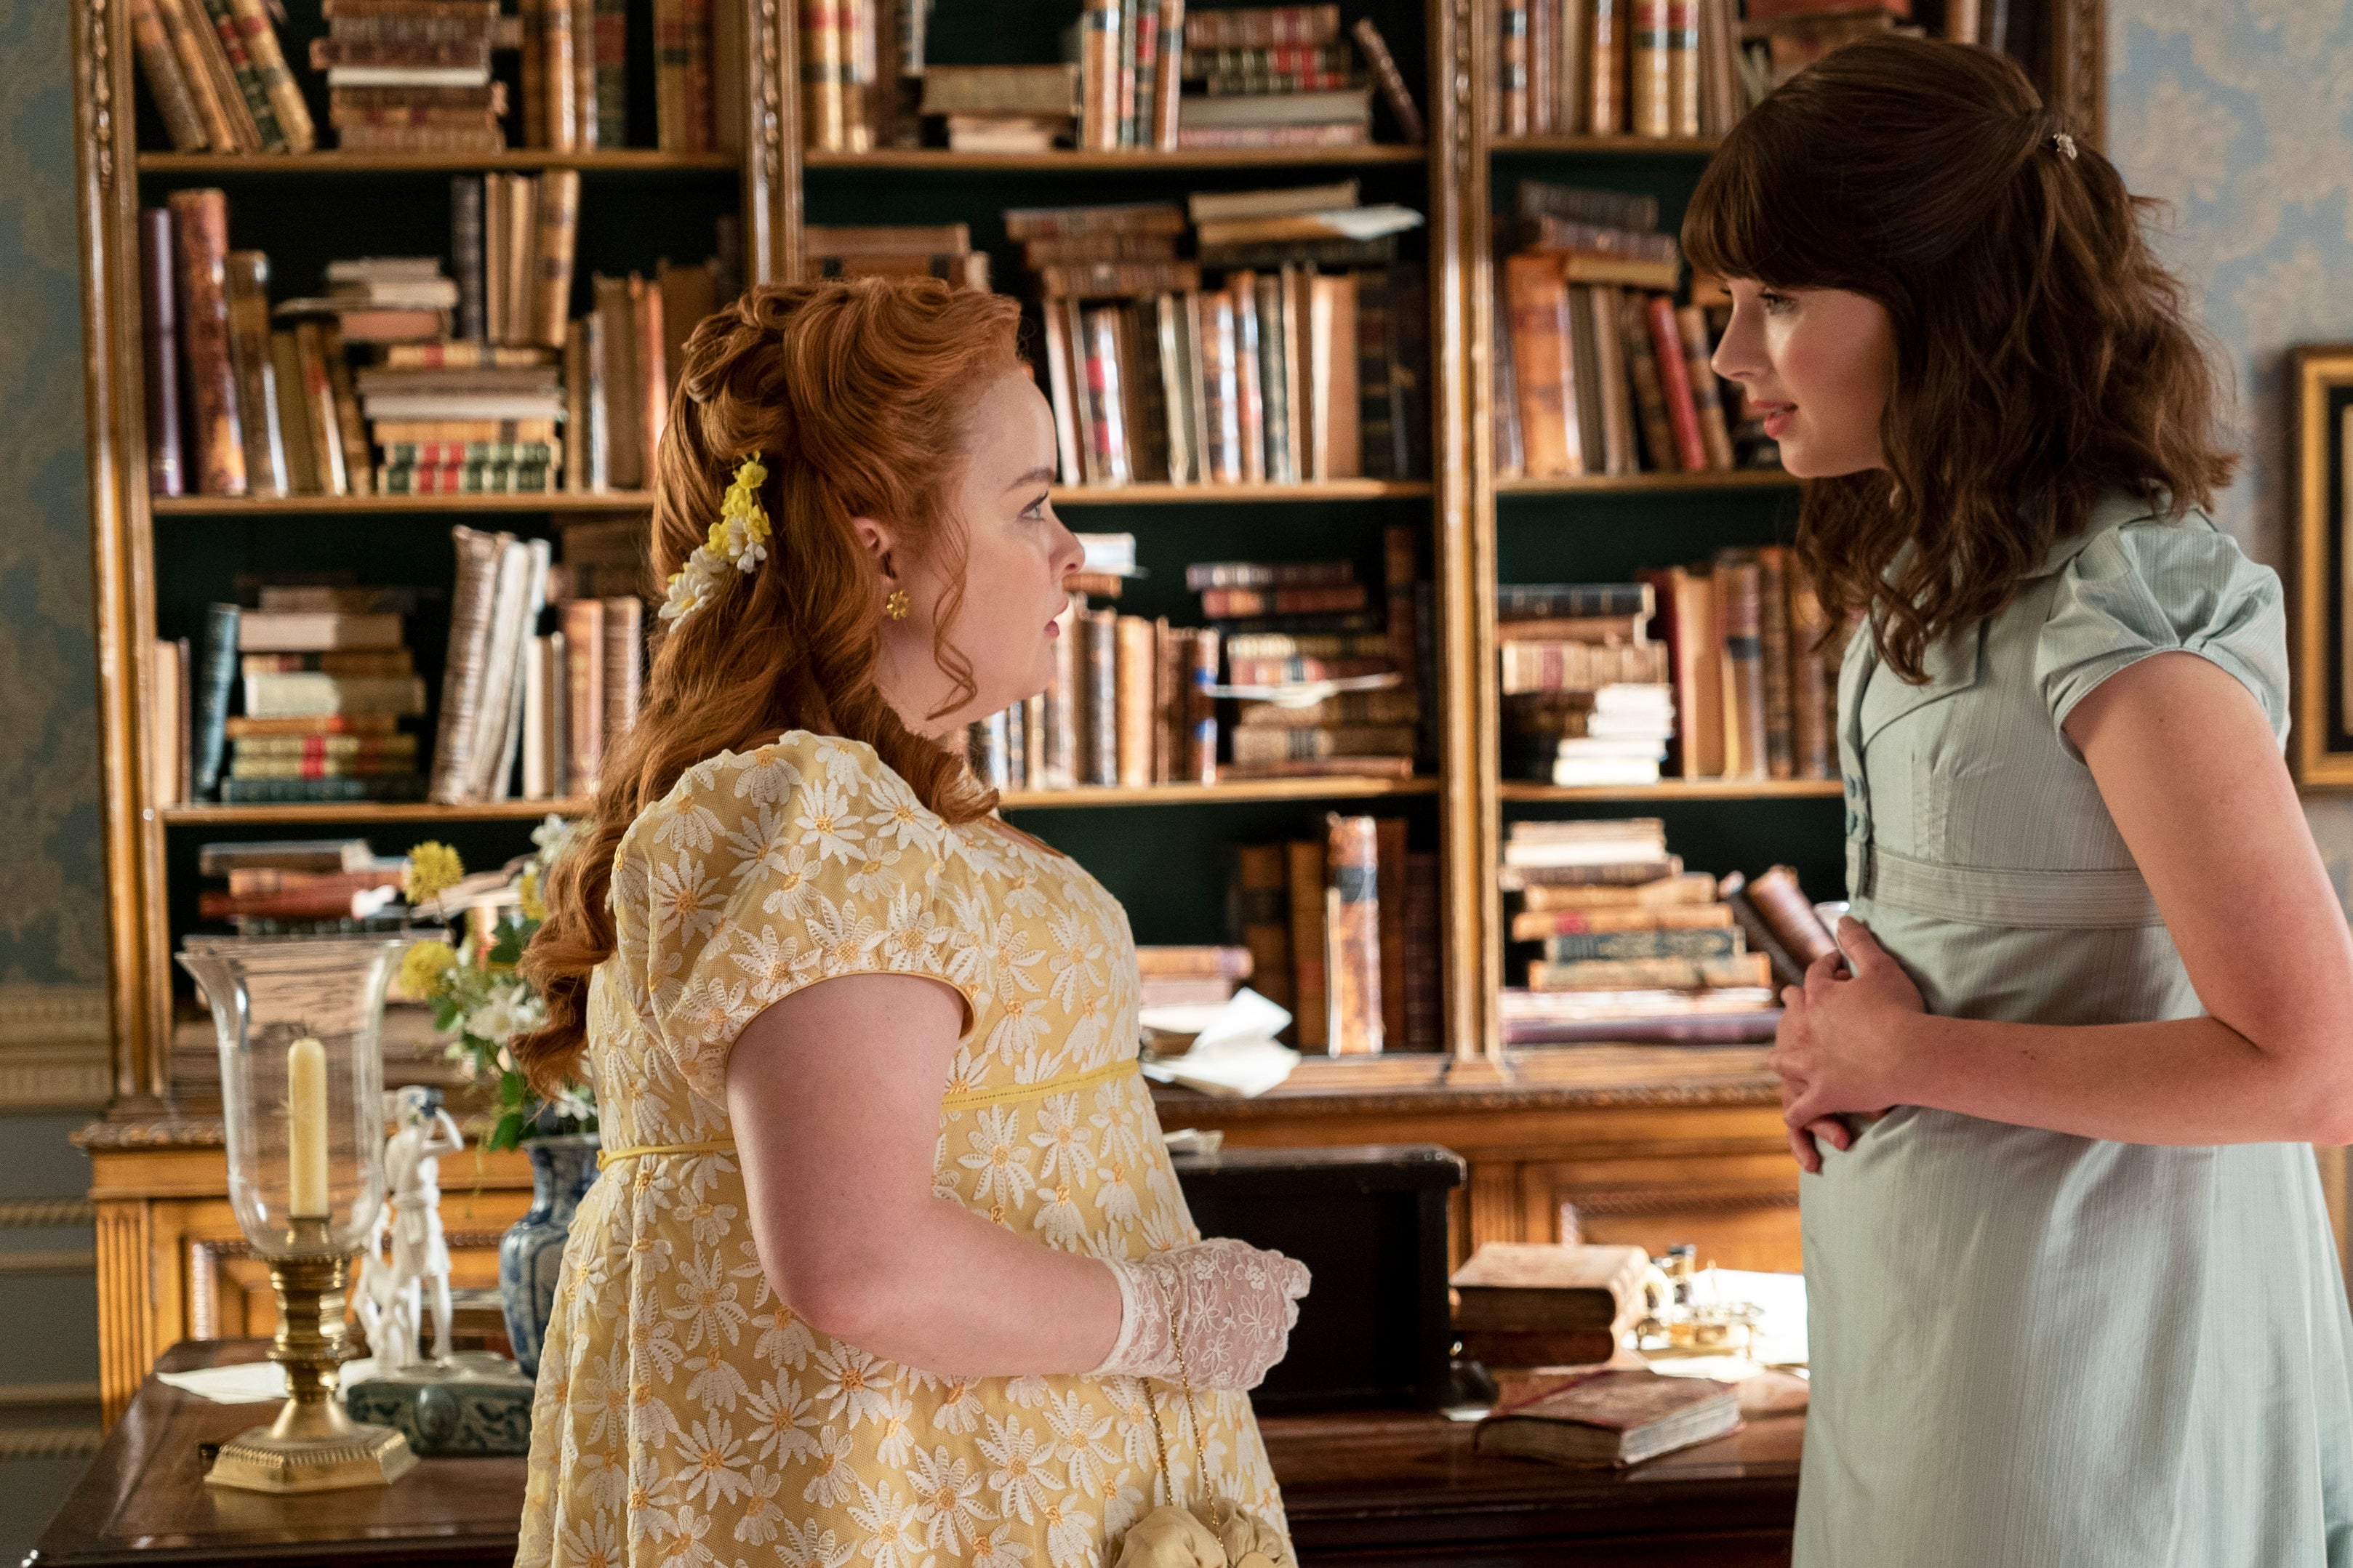 Nicola Coughlan as Penelope Featherington and Claudia Jessie as Eloise Bridgerton stand facing one another in front of a desk and bookshelf.